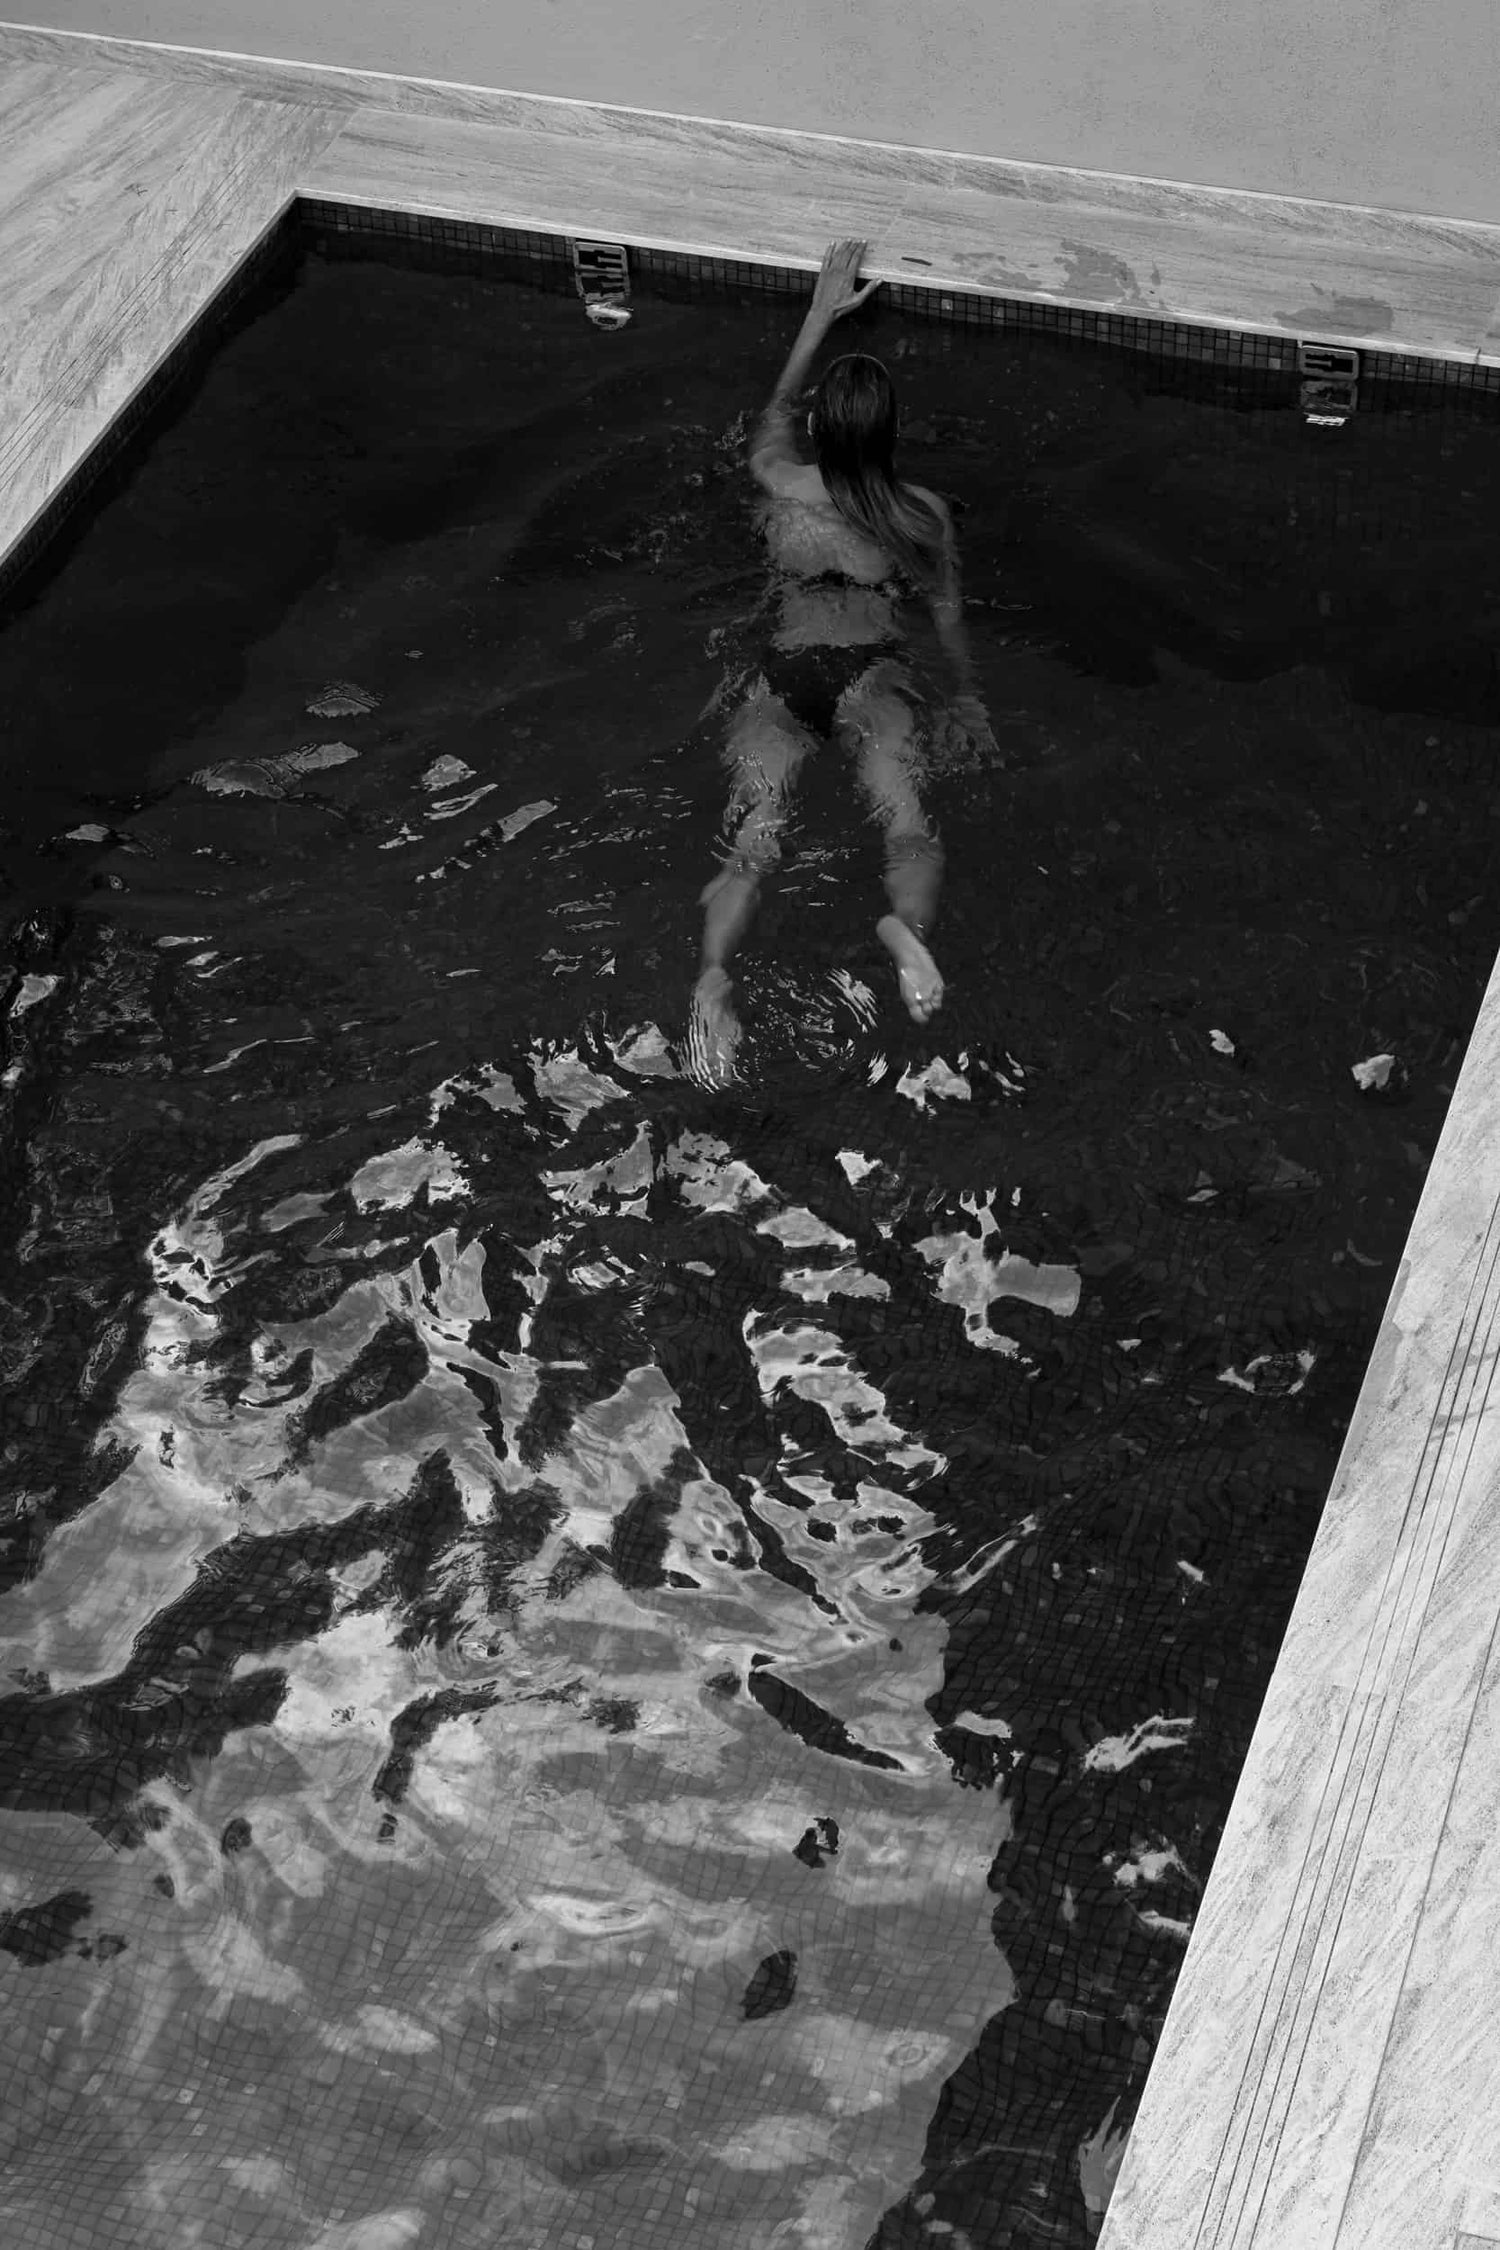 The artpiece 'She Was Here' by Mathieu Puga is a black and white fine art piece and pictures a woman swimming in a pool, reaching for the edge, seen from above.